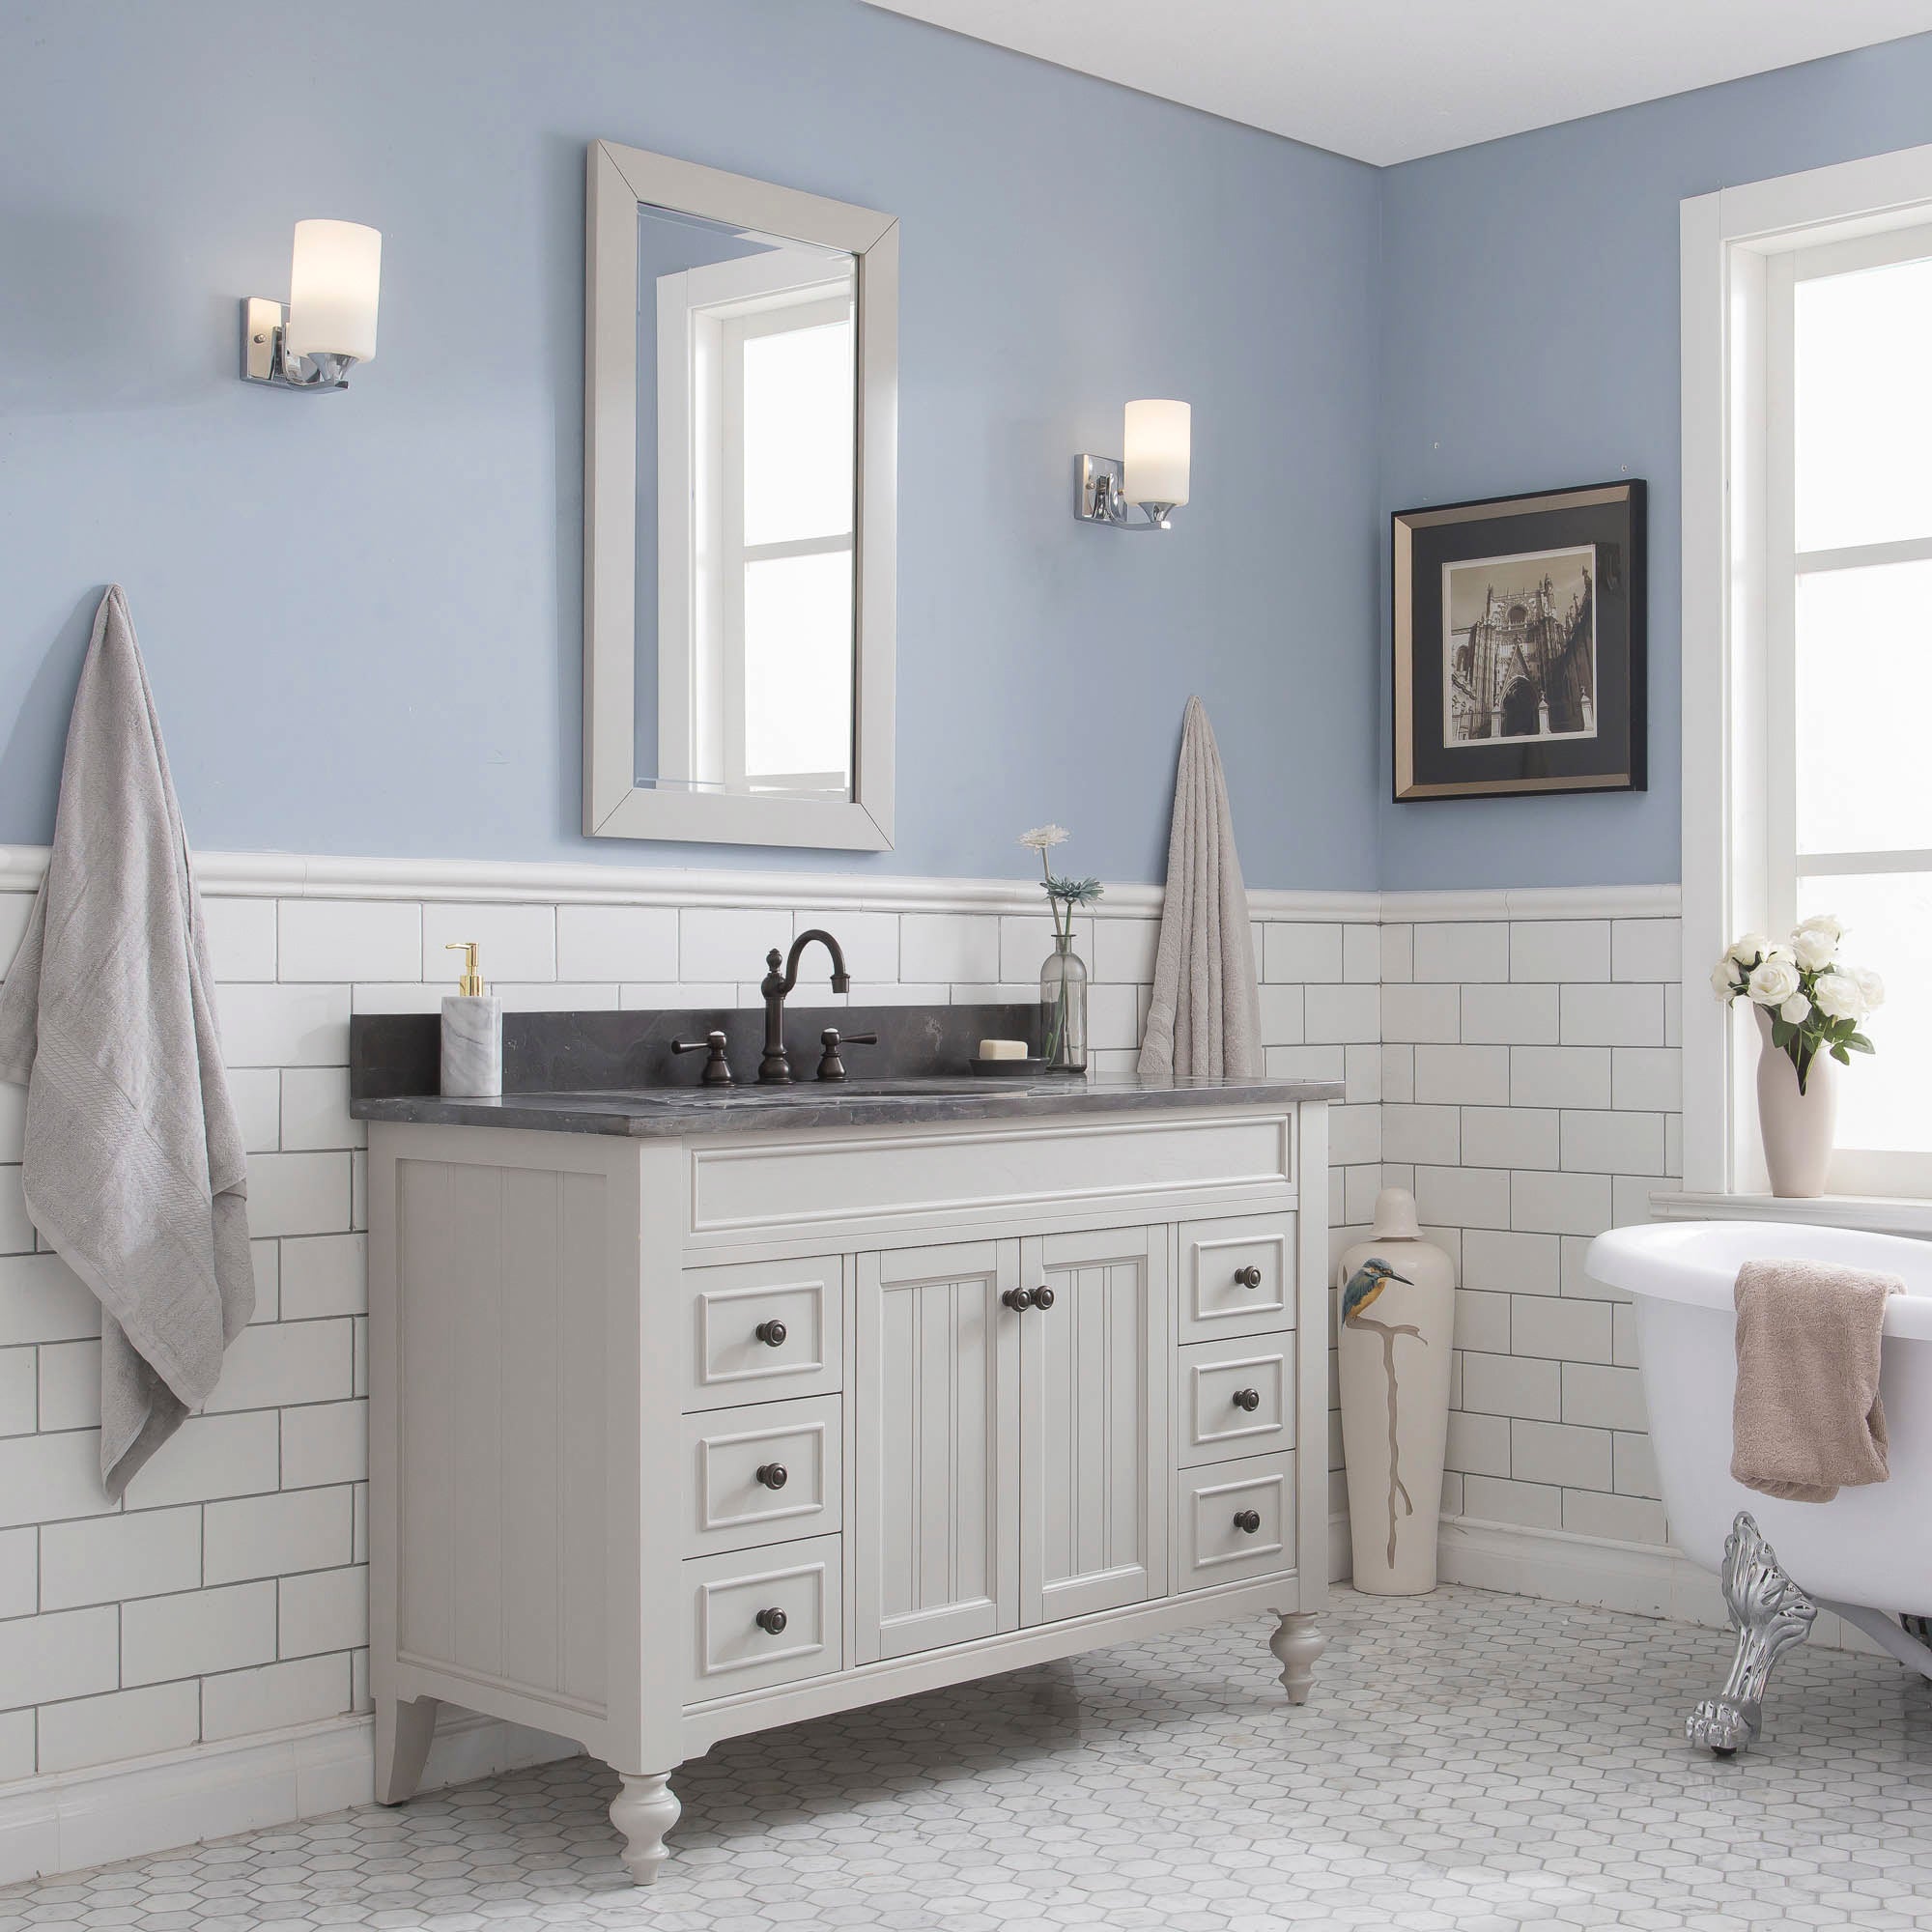 Water Creation | Potenza 48" Bathroom Vanity in Earl Grey with Blue Limestone Top with Faucet and Mirror | PO48BL03EG-R24TL1203